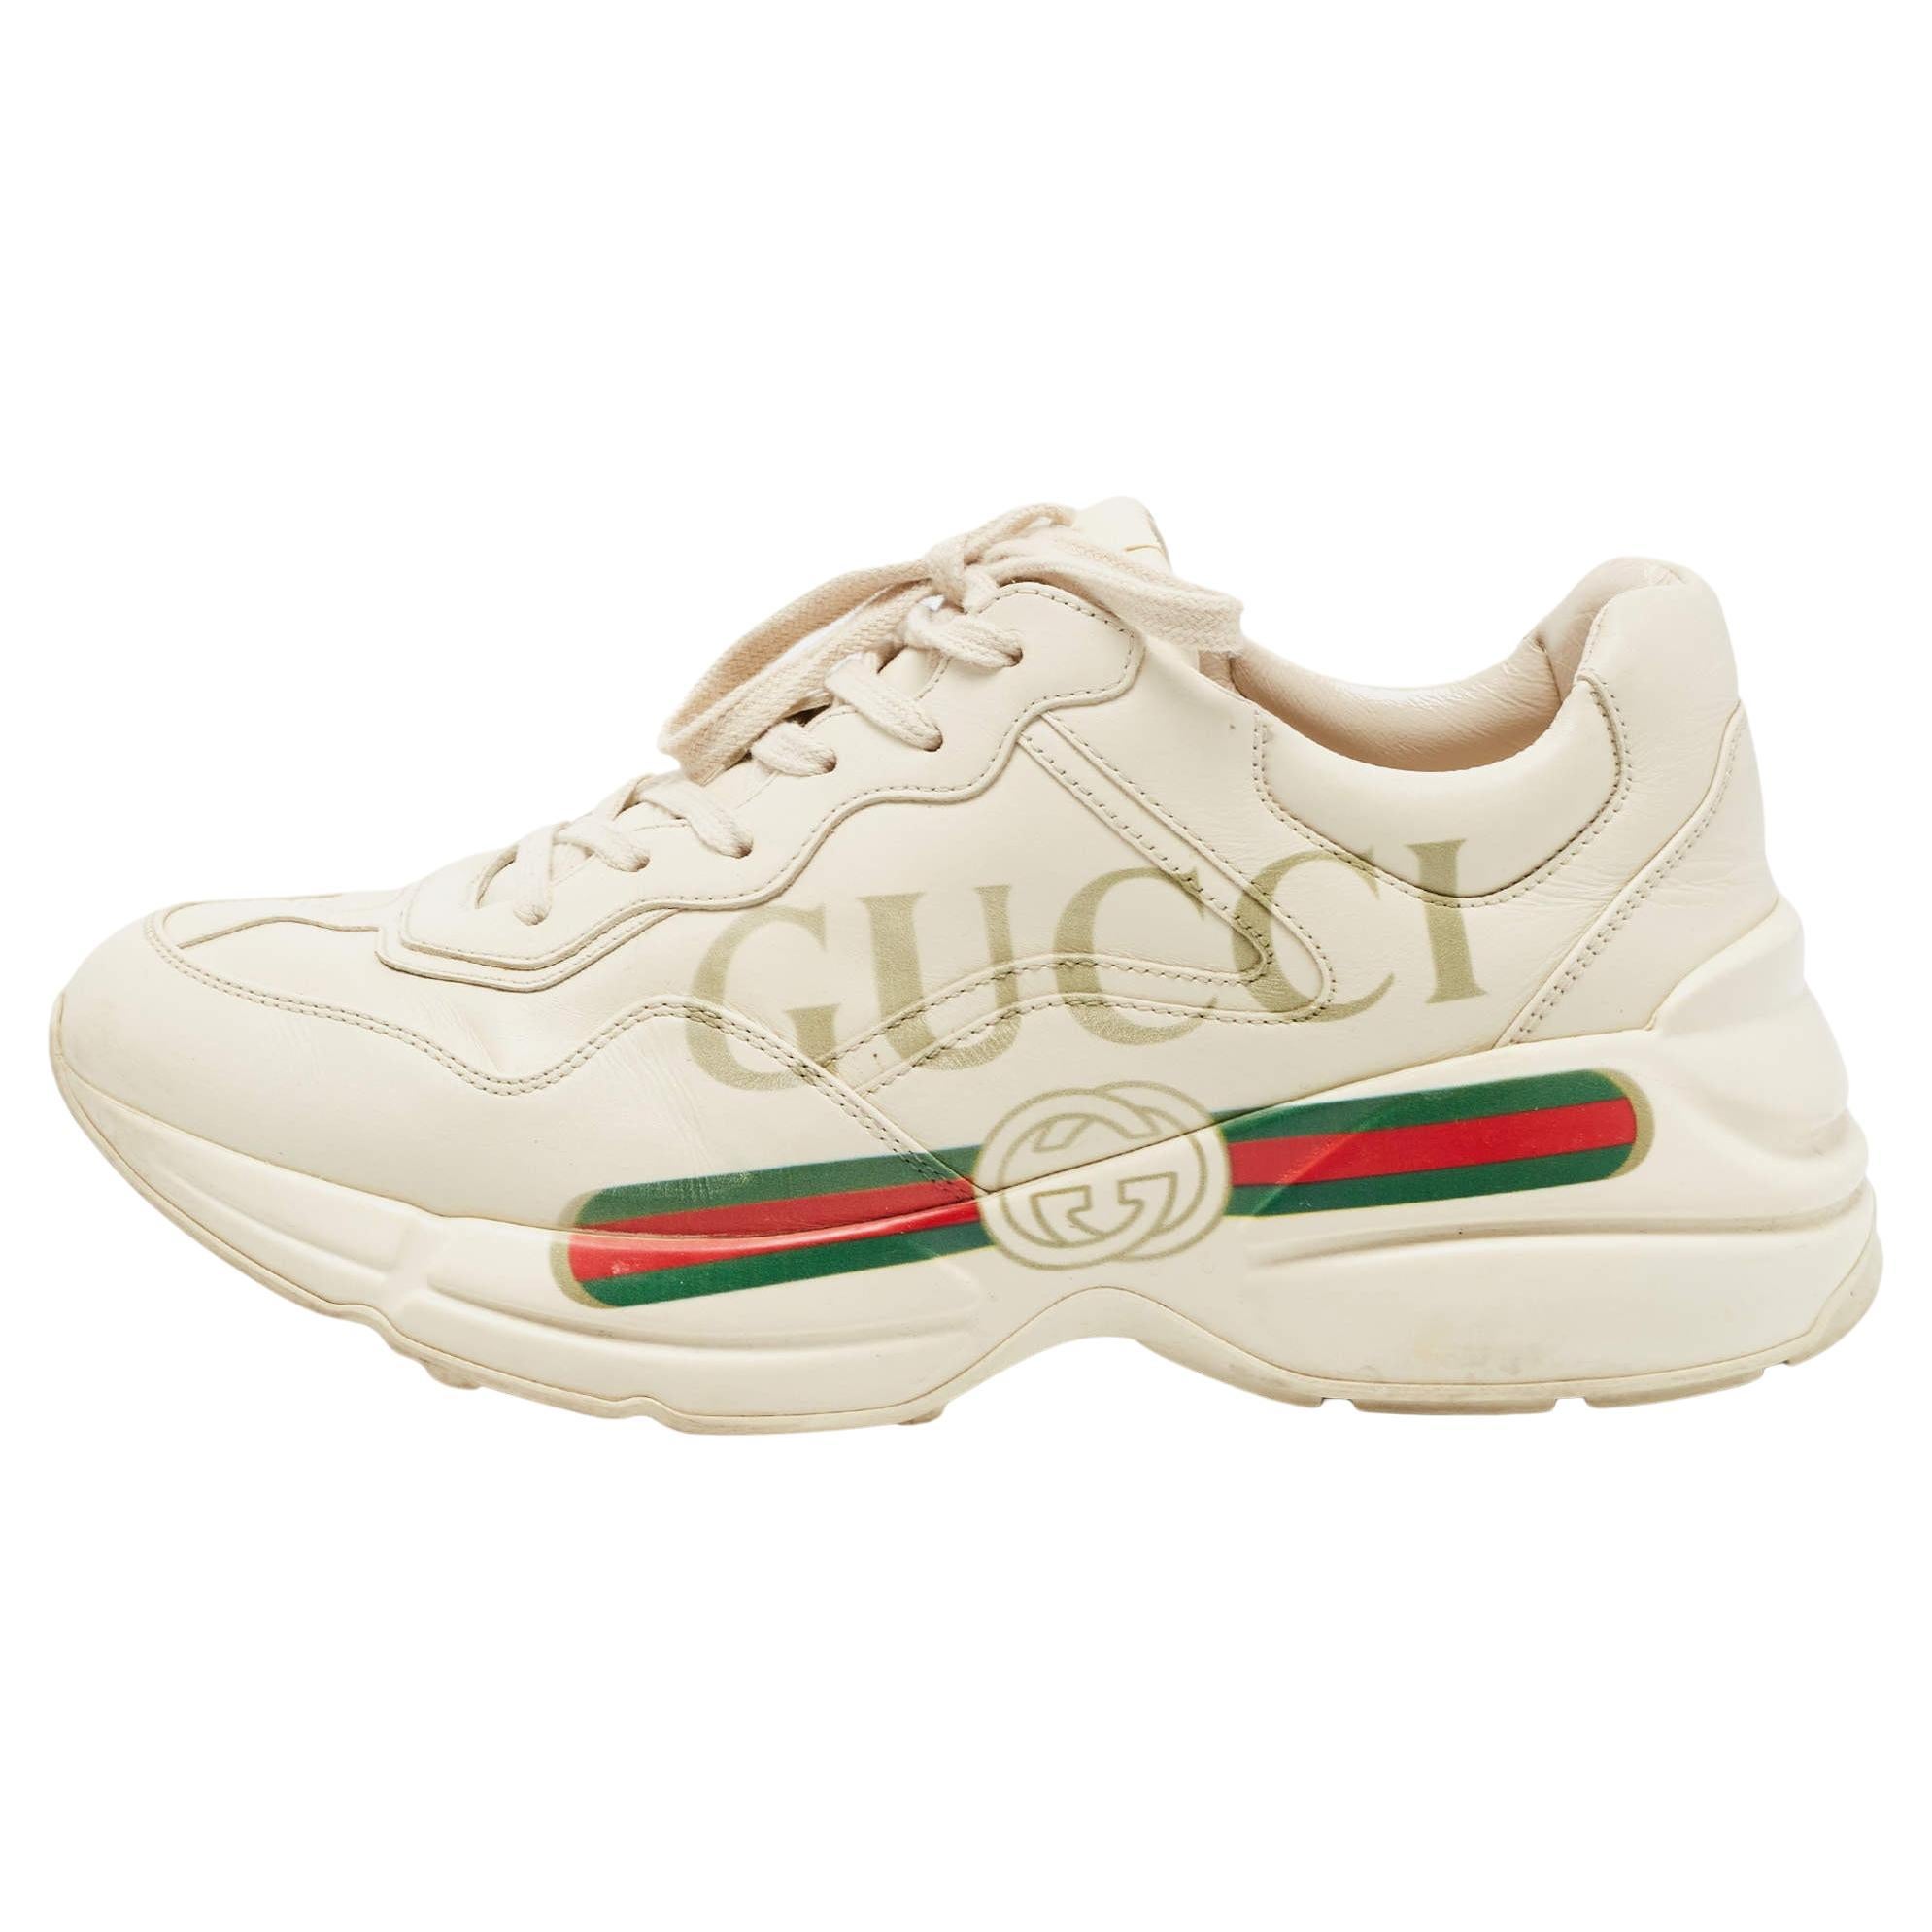 Gucci White Leather Rhyton Low Top Sneakers Size 40.5